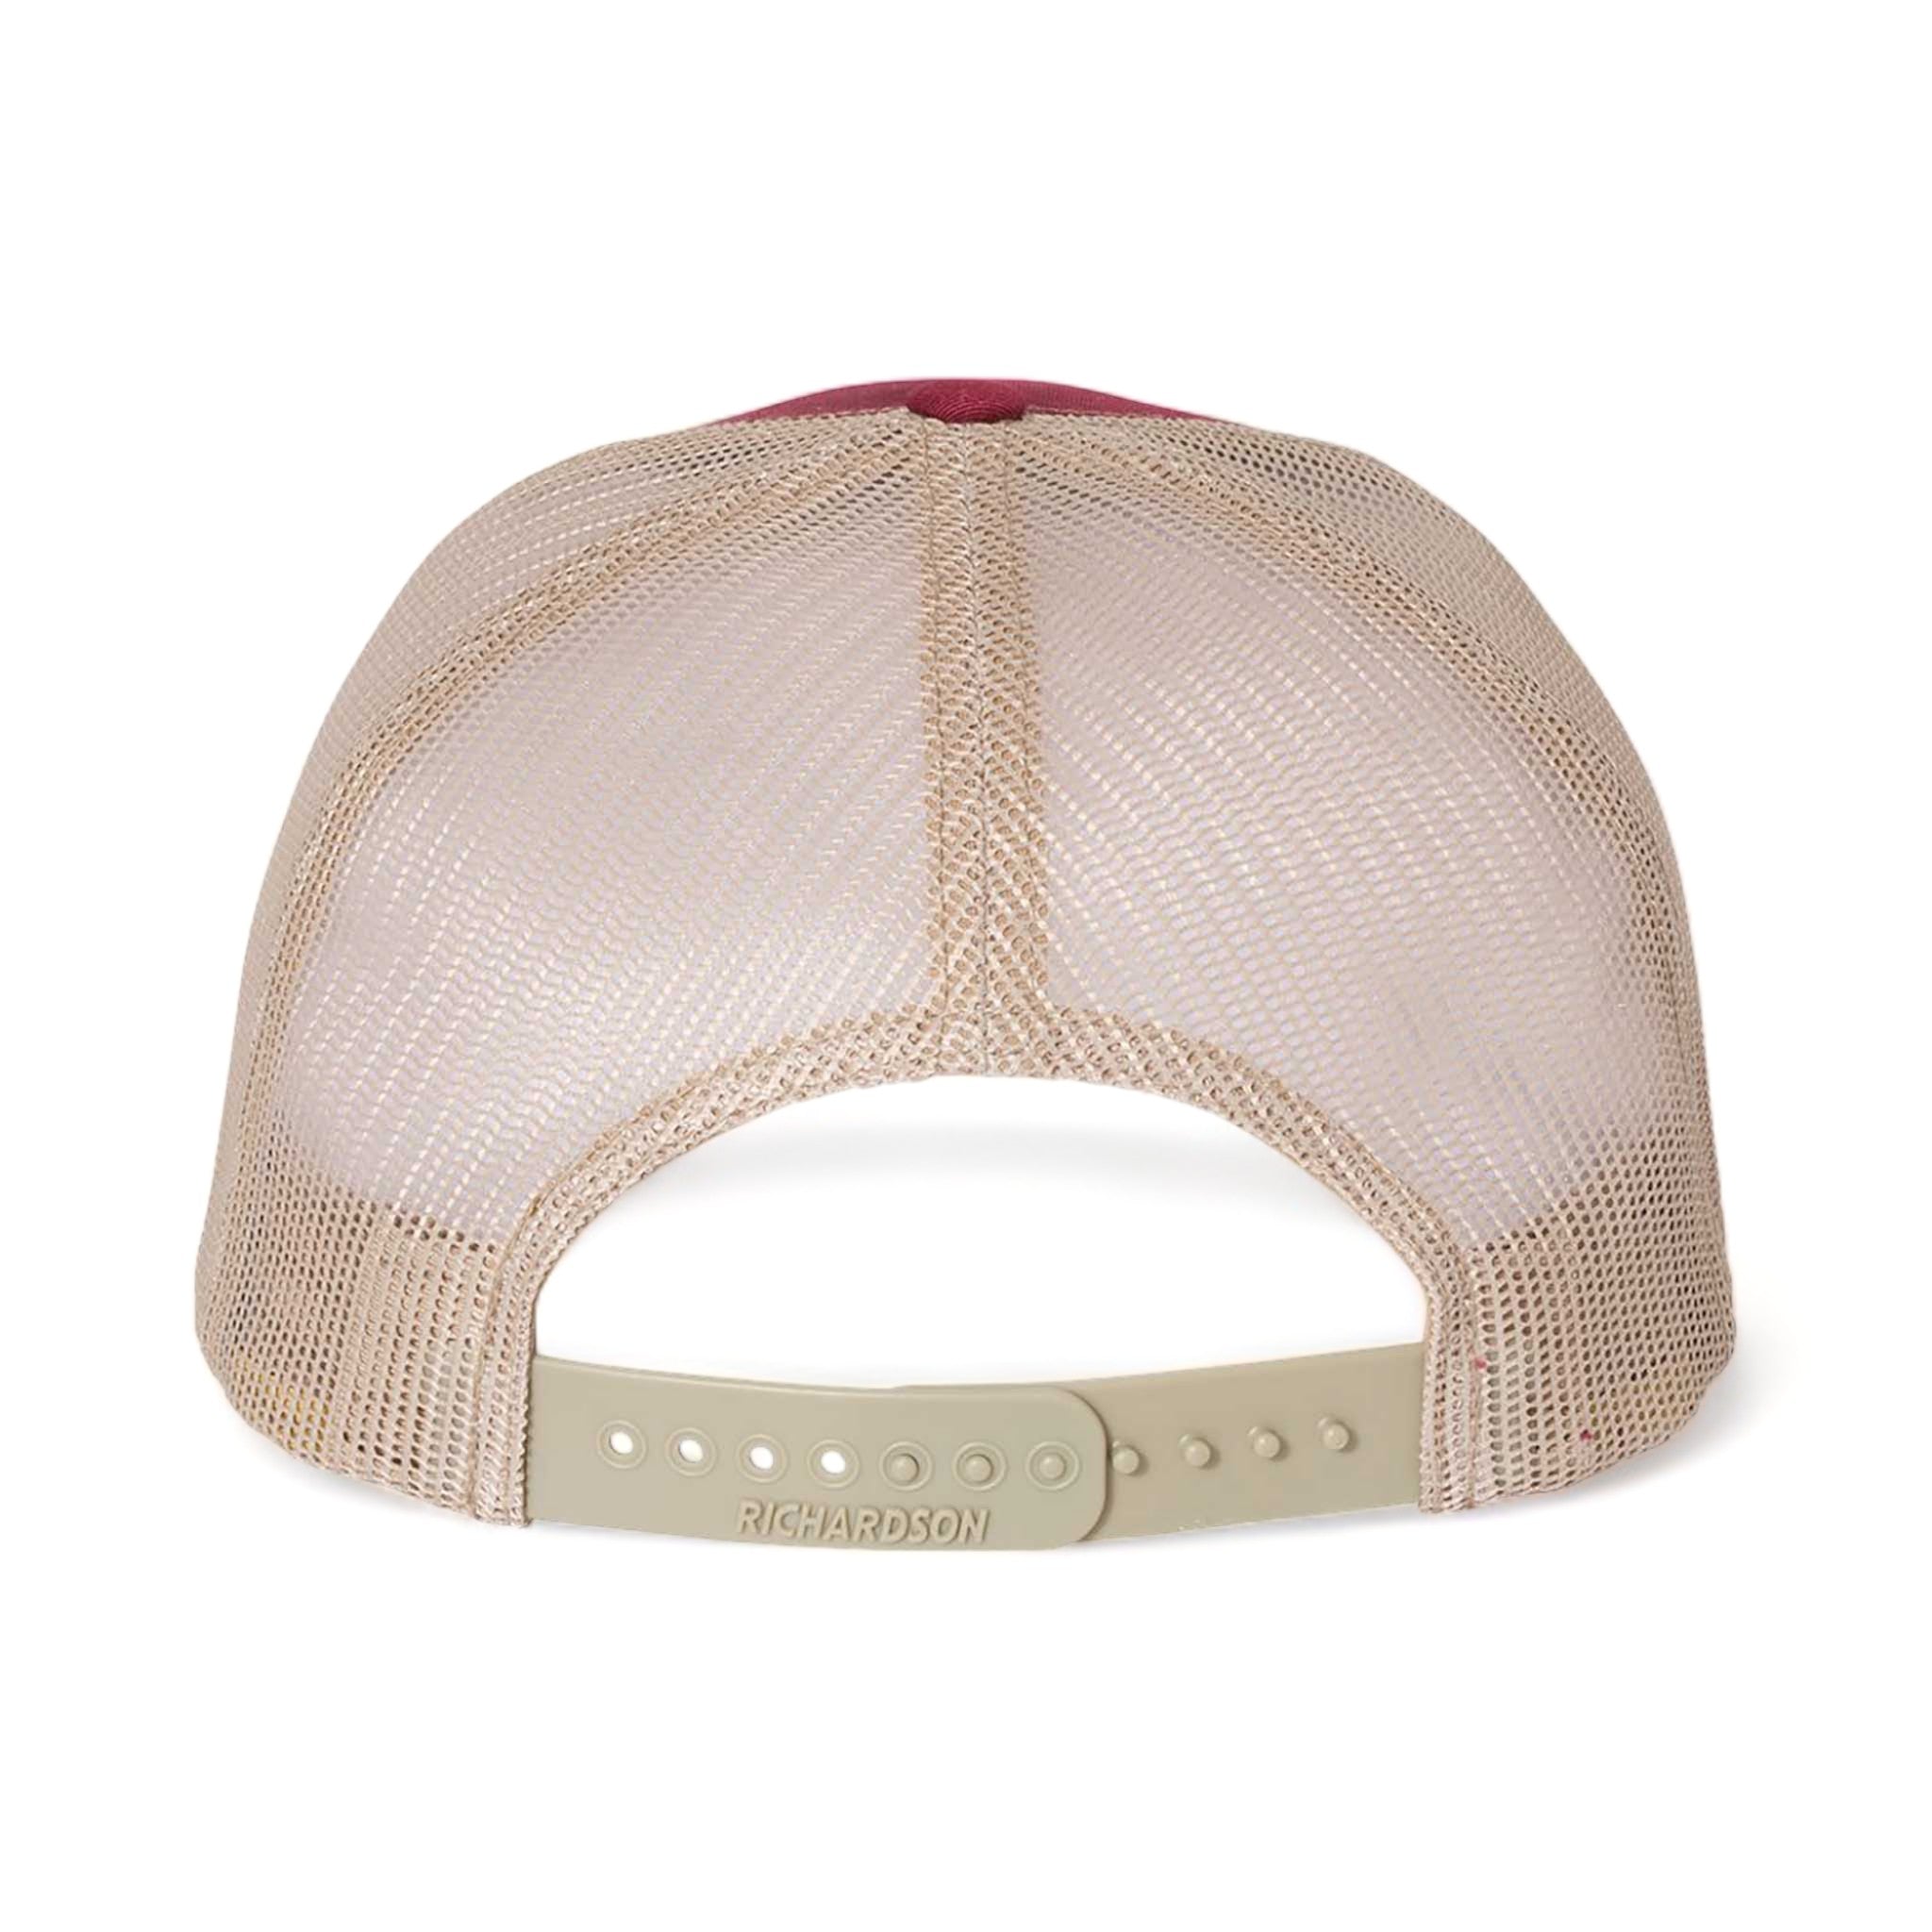 Back view of Richardson 112FP custom hat in cardinal and tan